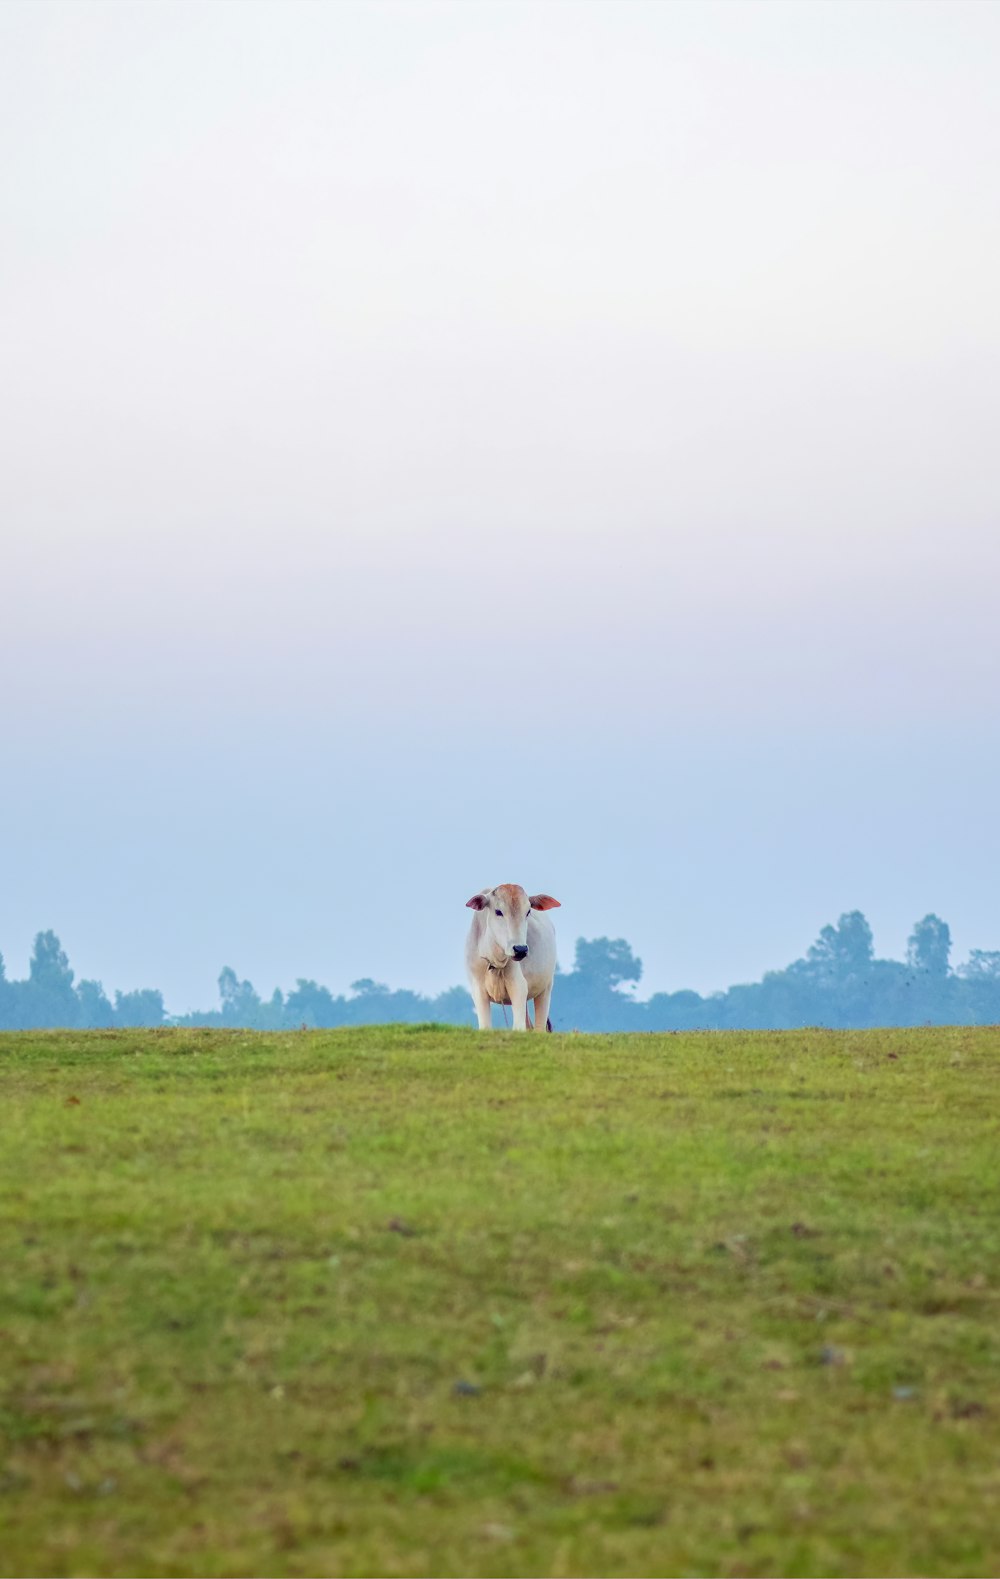 a sheep standing in a grassy field with trees in the background